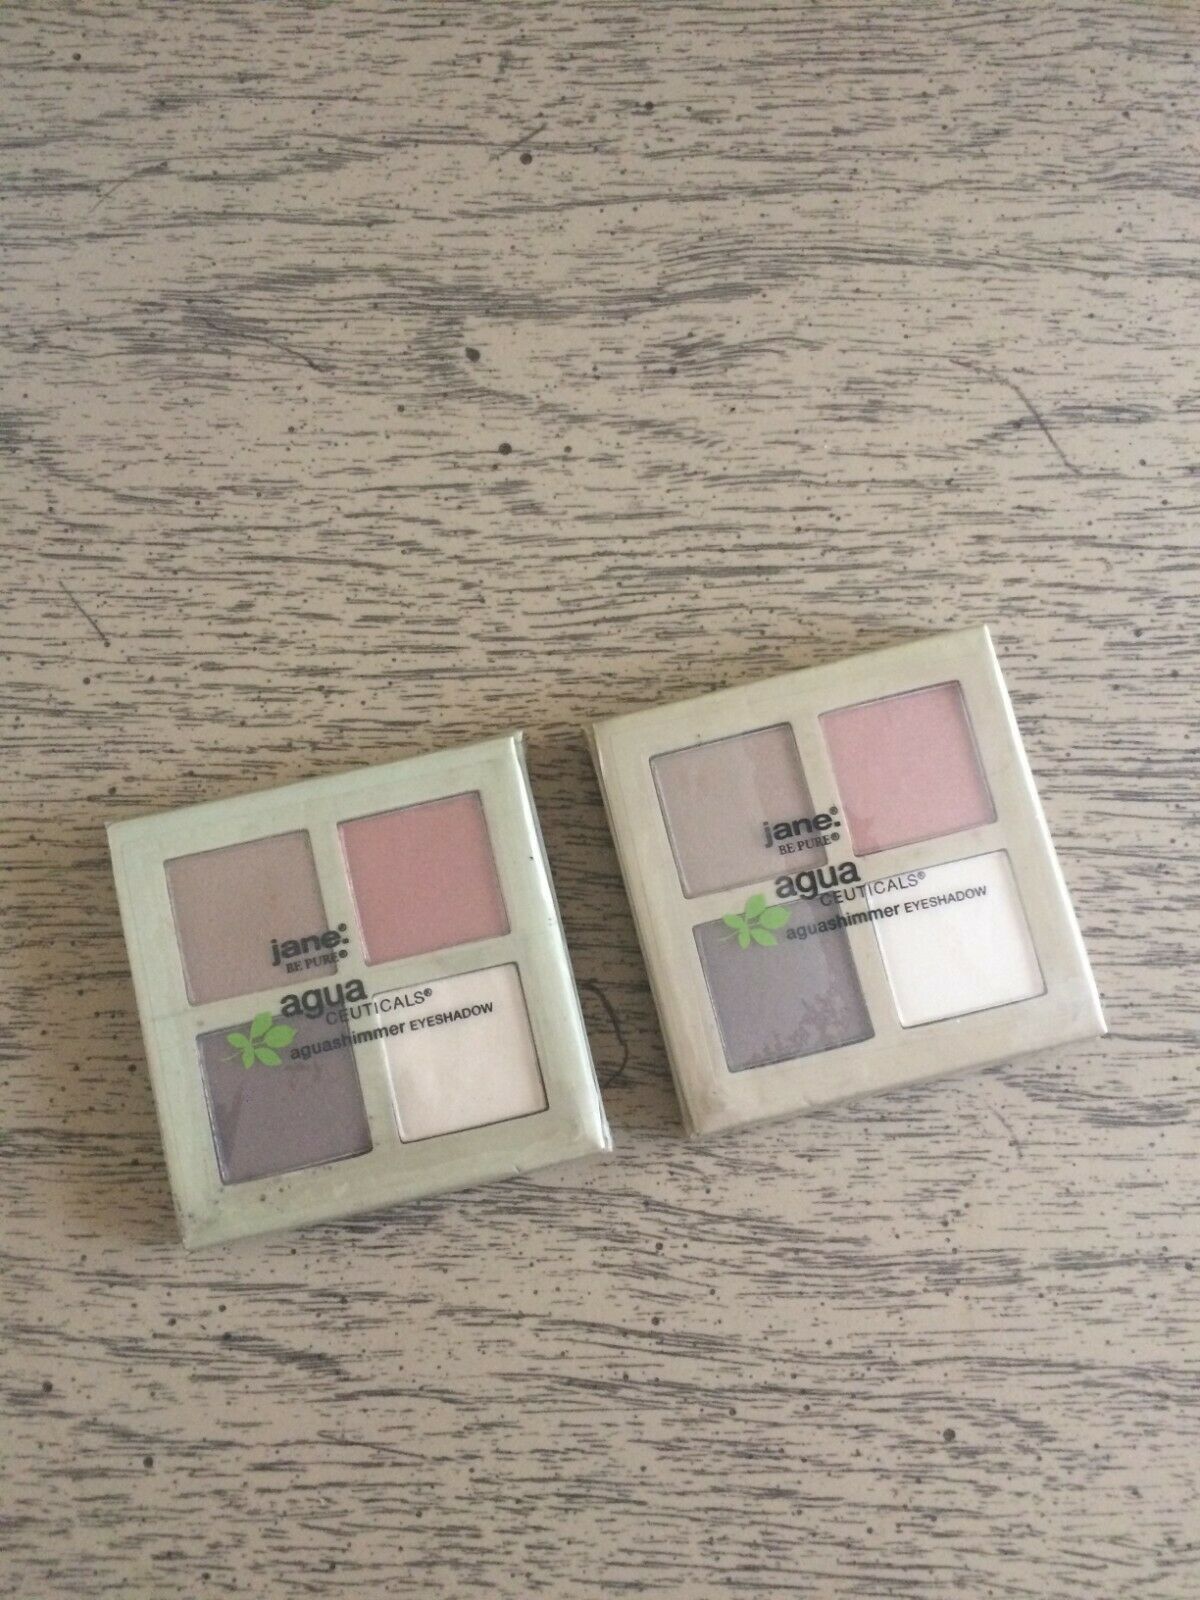 Jane Be Pure Agua Ceuticals Aguashimmer Eyeshadow #02 Sandstorm SEALED Lot of 2  - $14.99